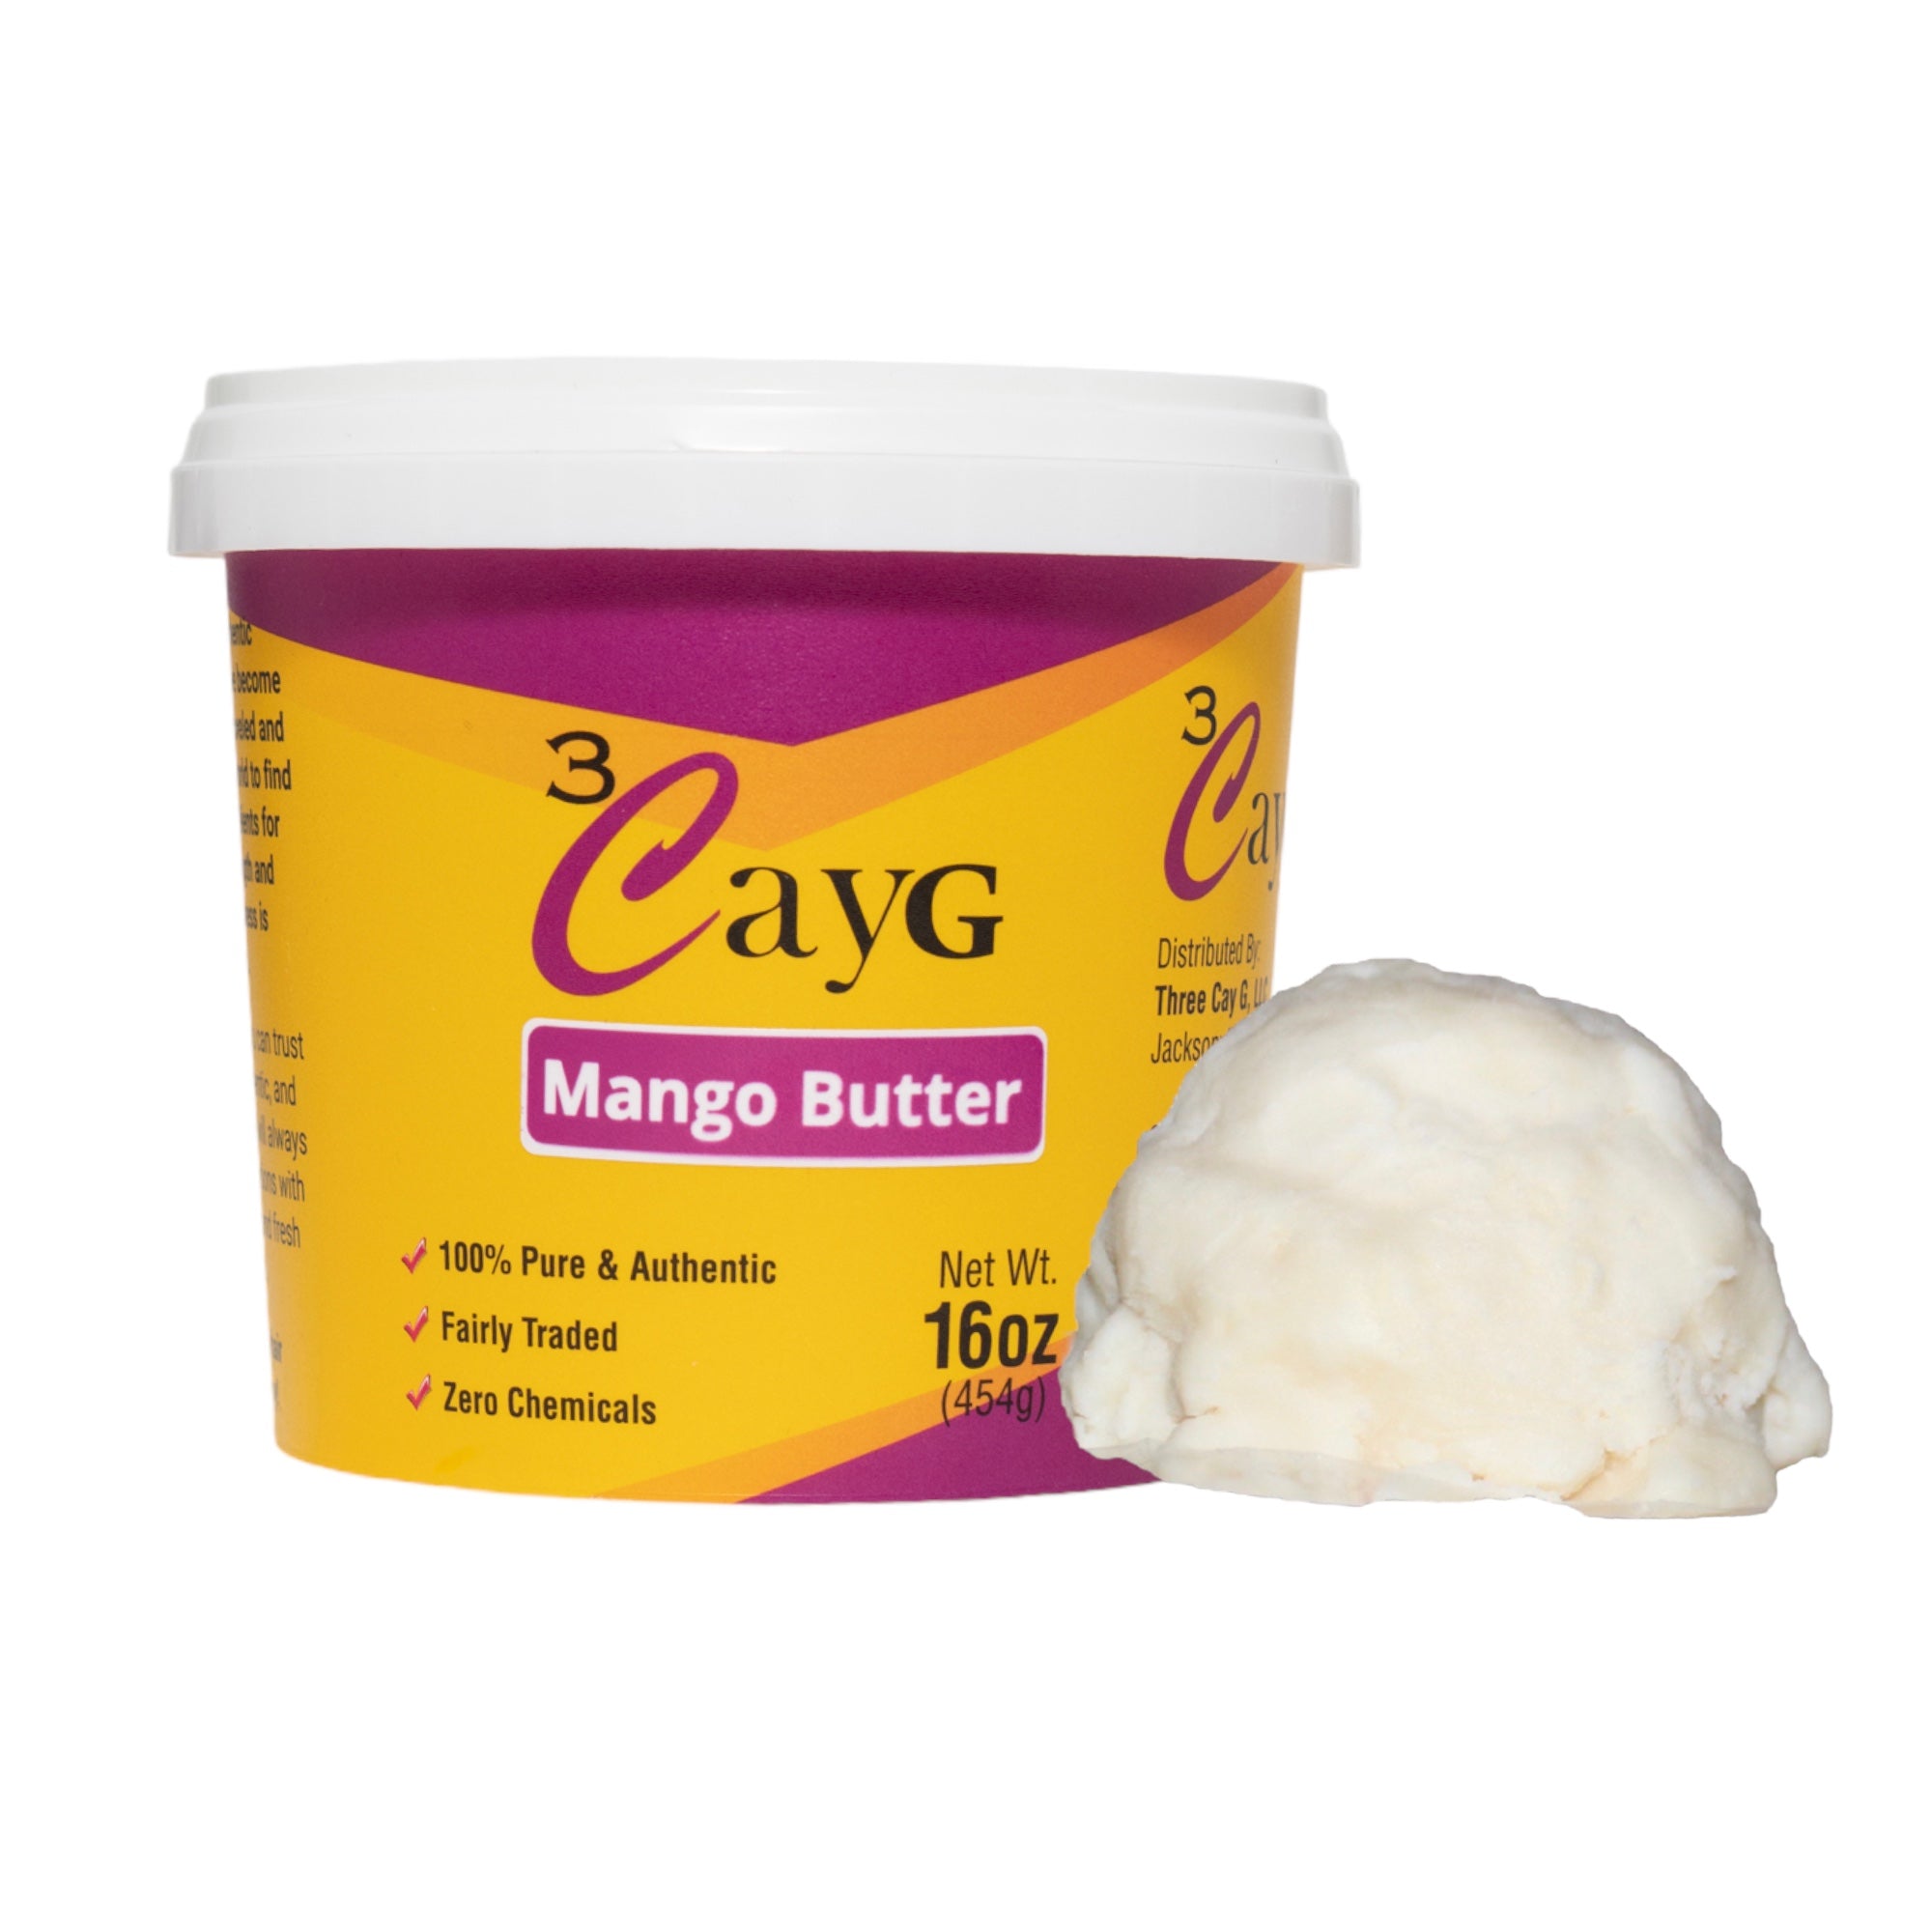 3CayG Bulk Natural Oils, Raw Shea Butter, and African Black Soap